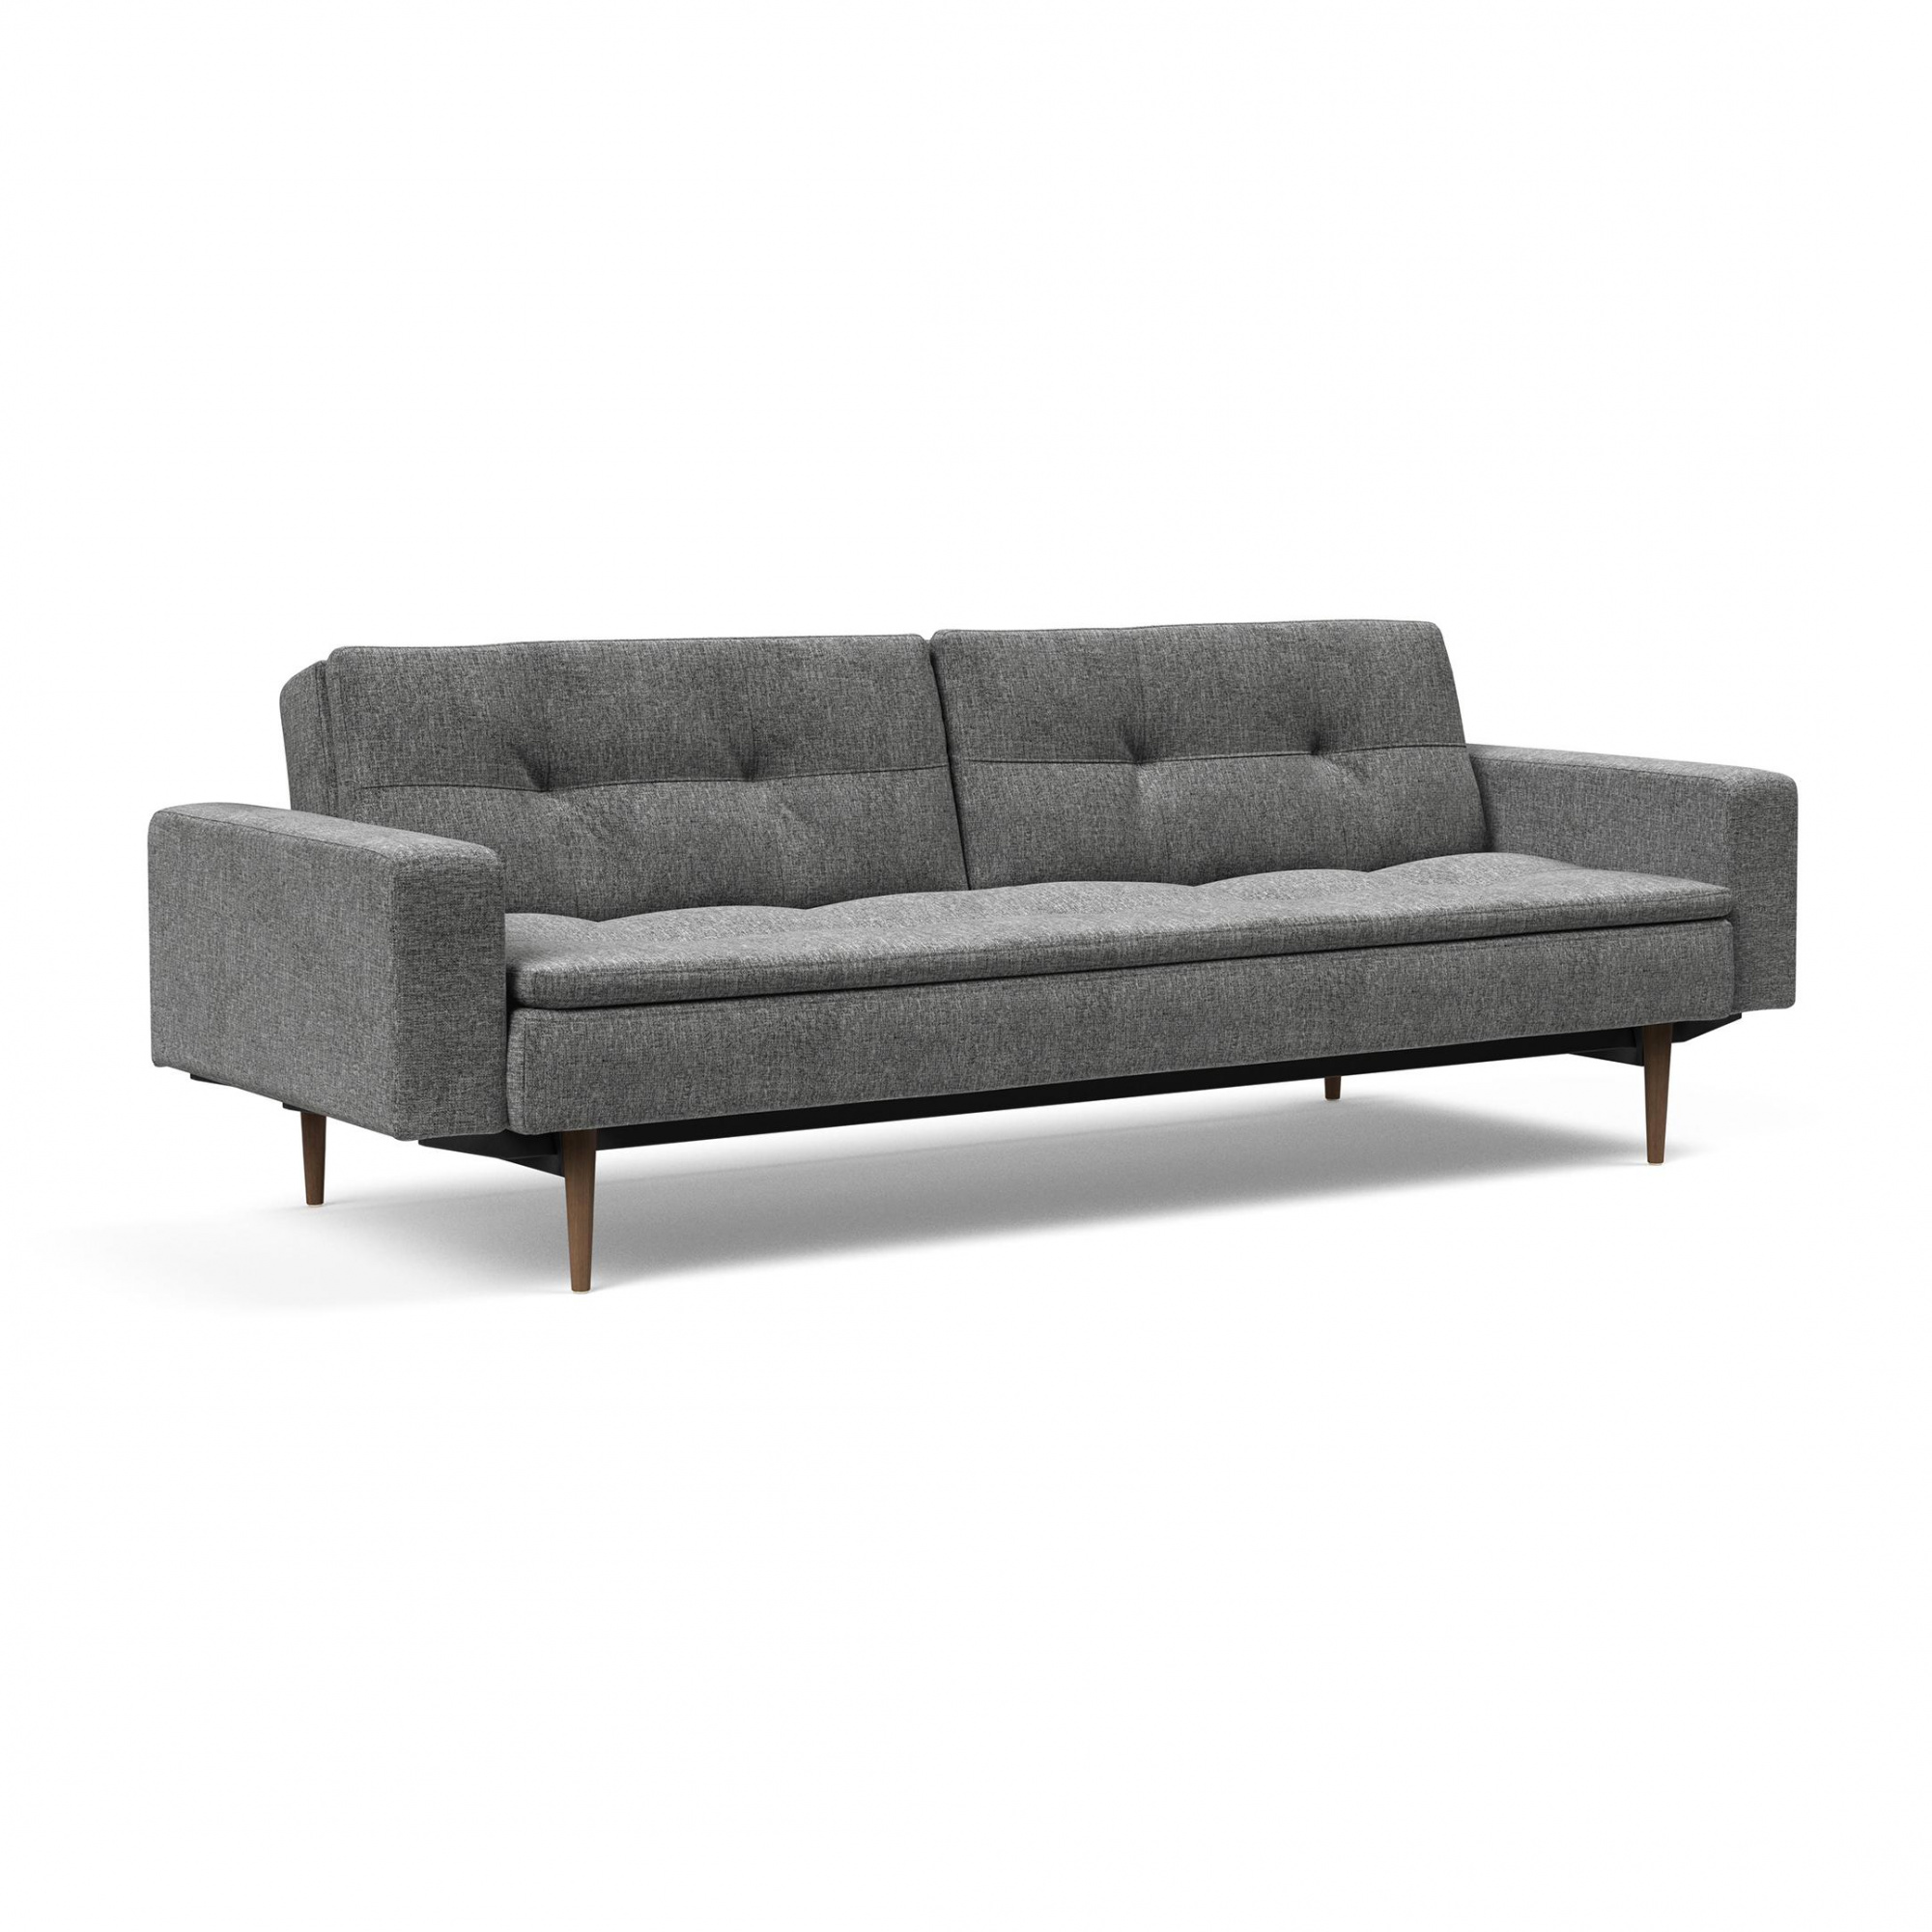 Innovation - Dublexo Styletto Sofa Bed With Armrests Dark Wood - dunkelgrau/Stoff 563 Twist Charcoal/Gestell Stahl schwarz/Fe dunkles Holz